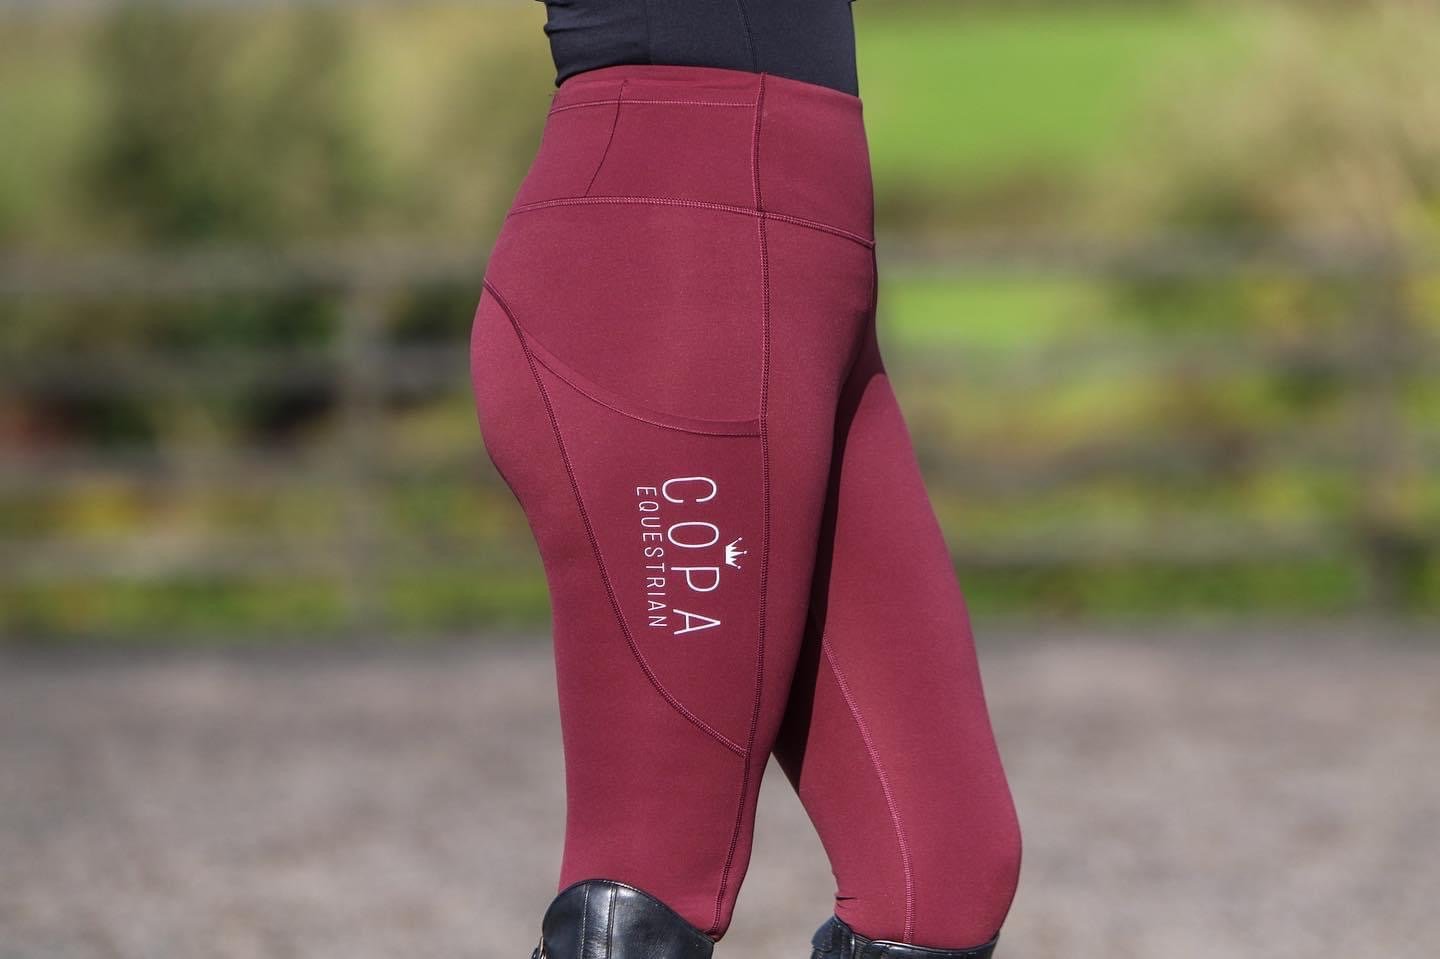 Performa Ride Youth Summer Riding Tights - Hiscocks